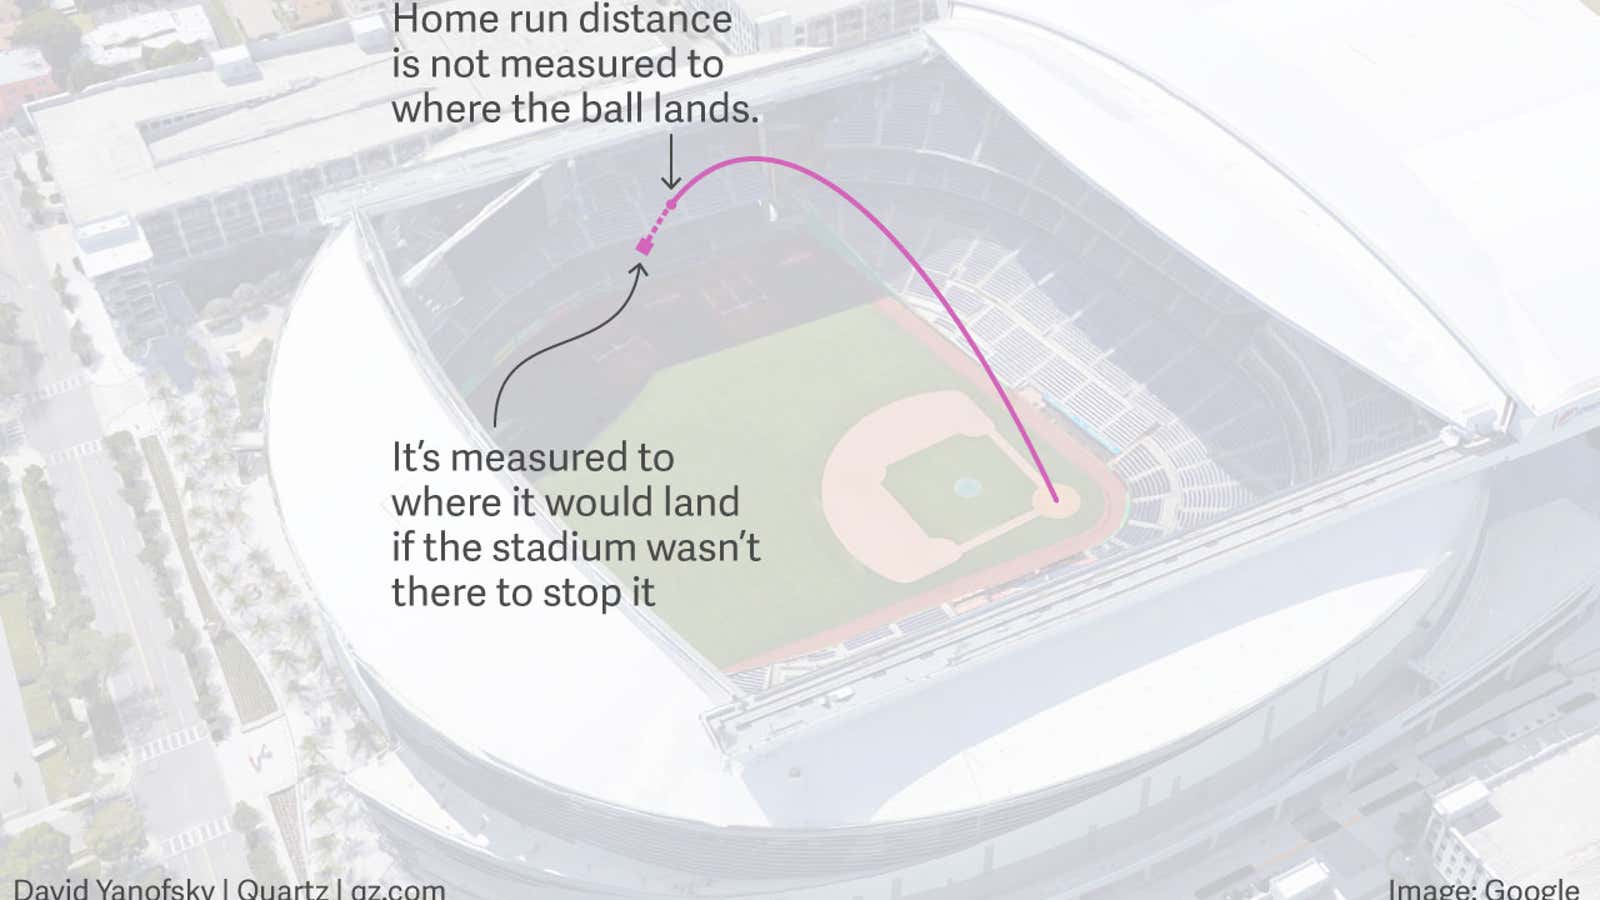 How home run distance is calculated